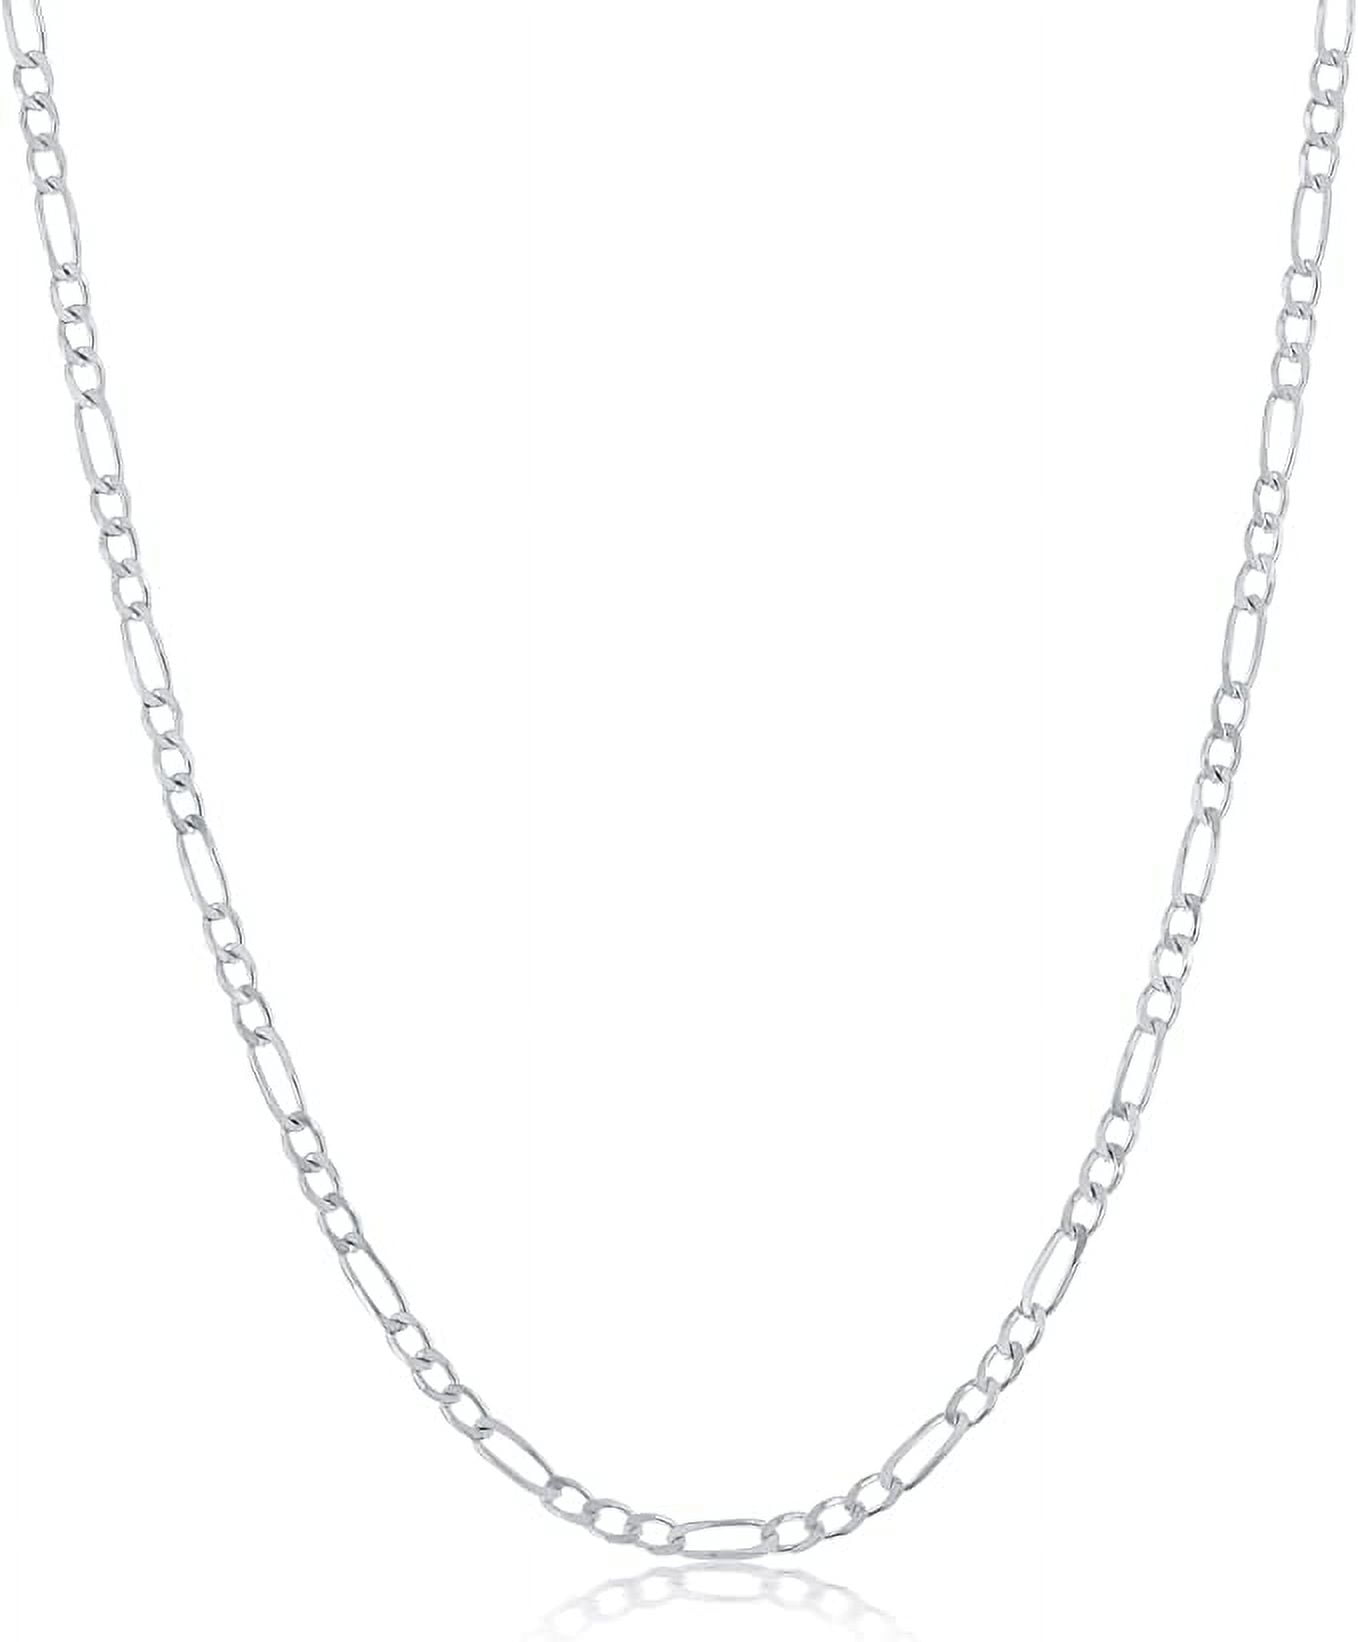 NYC Sterling Men's 5mm Solid Sterling Silver .925 Curb Link Chain Necklace,  Made in Italy (18) 